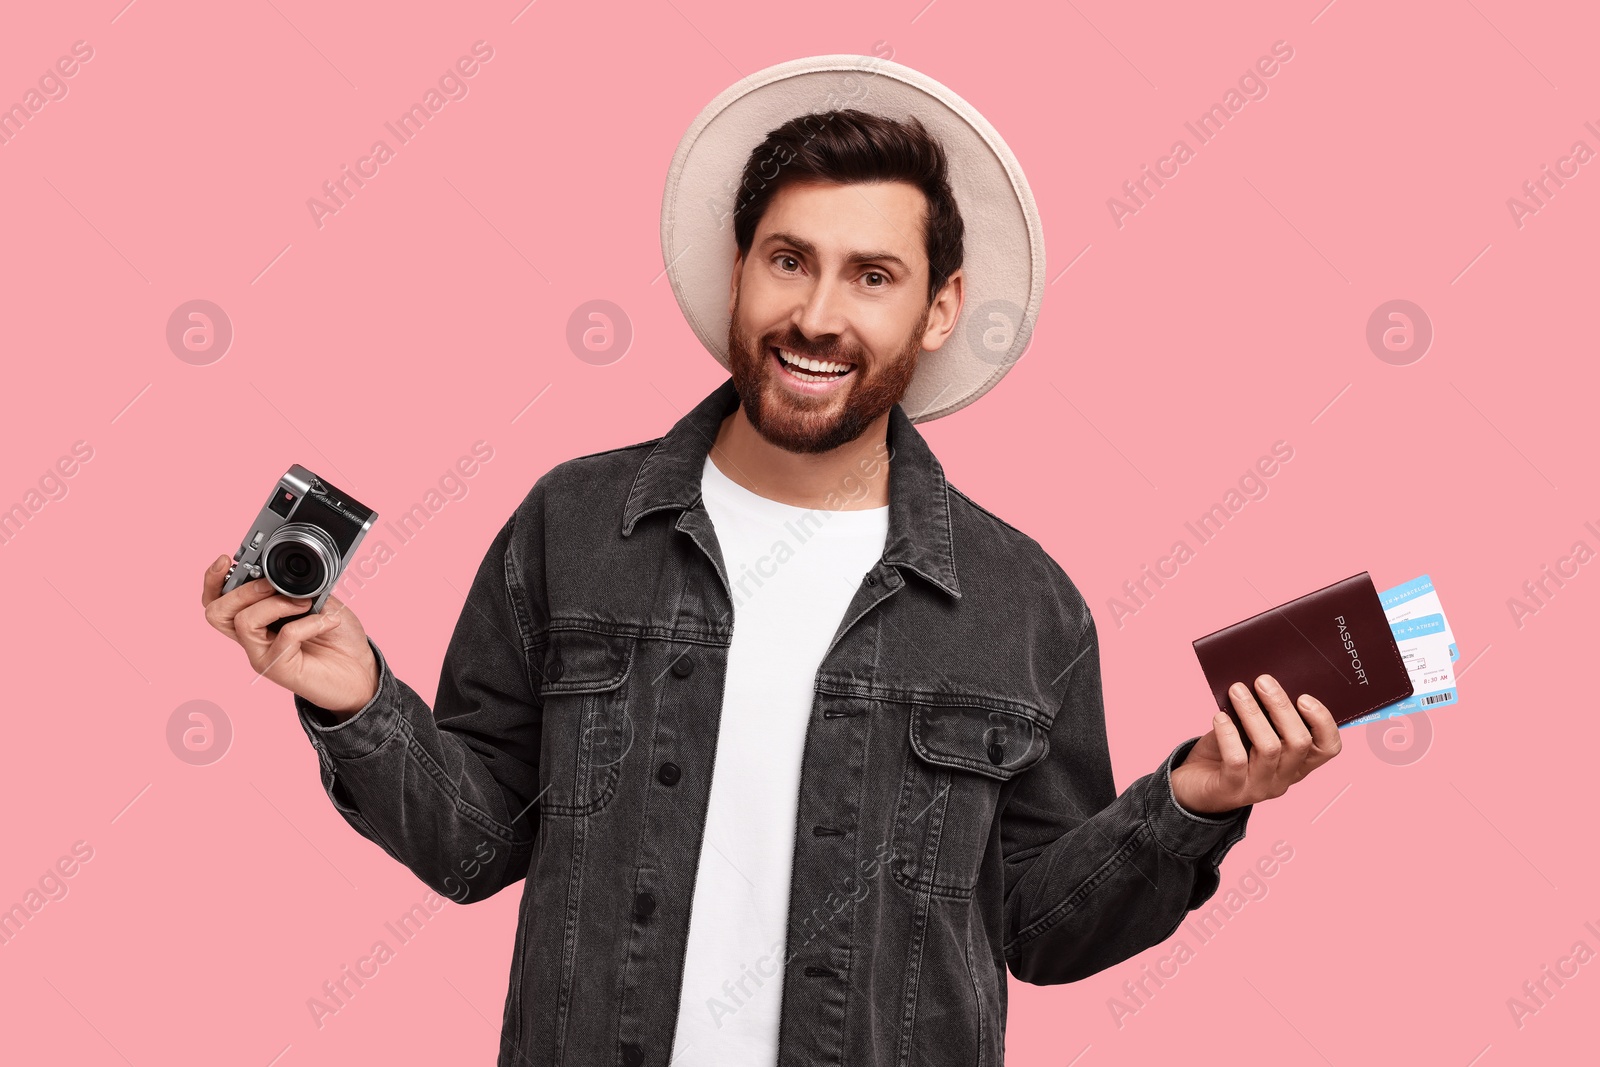 Photo of Smiling man with passport, tickets and camera on pink background